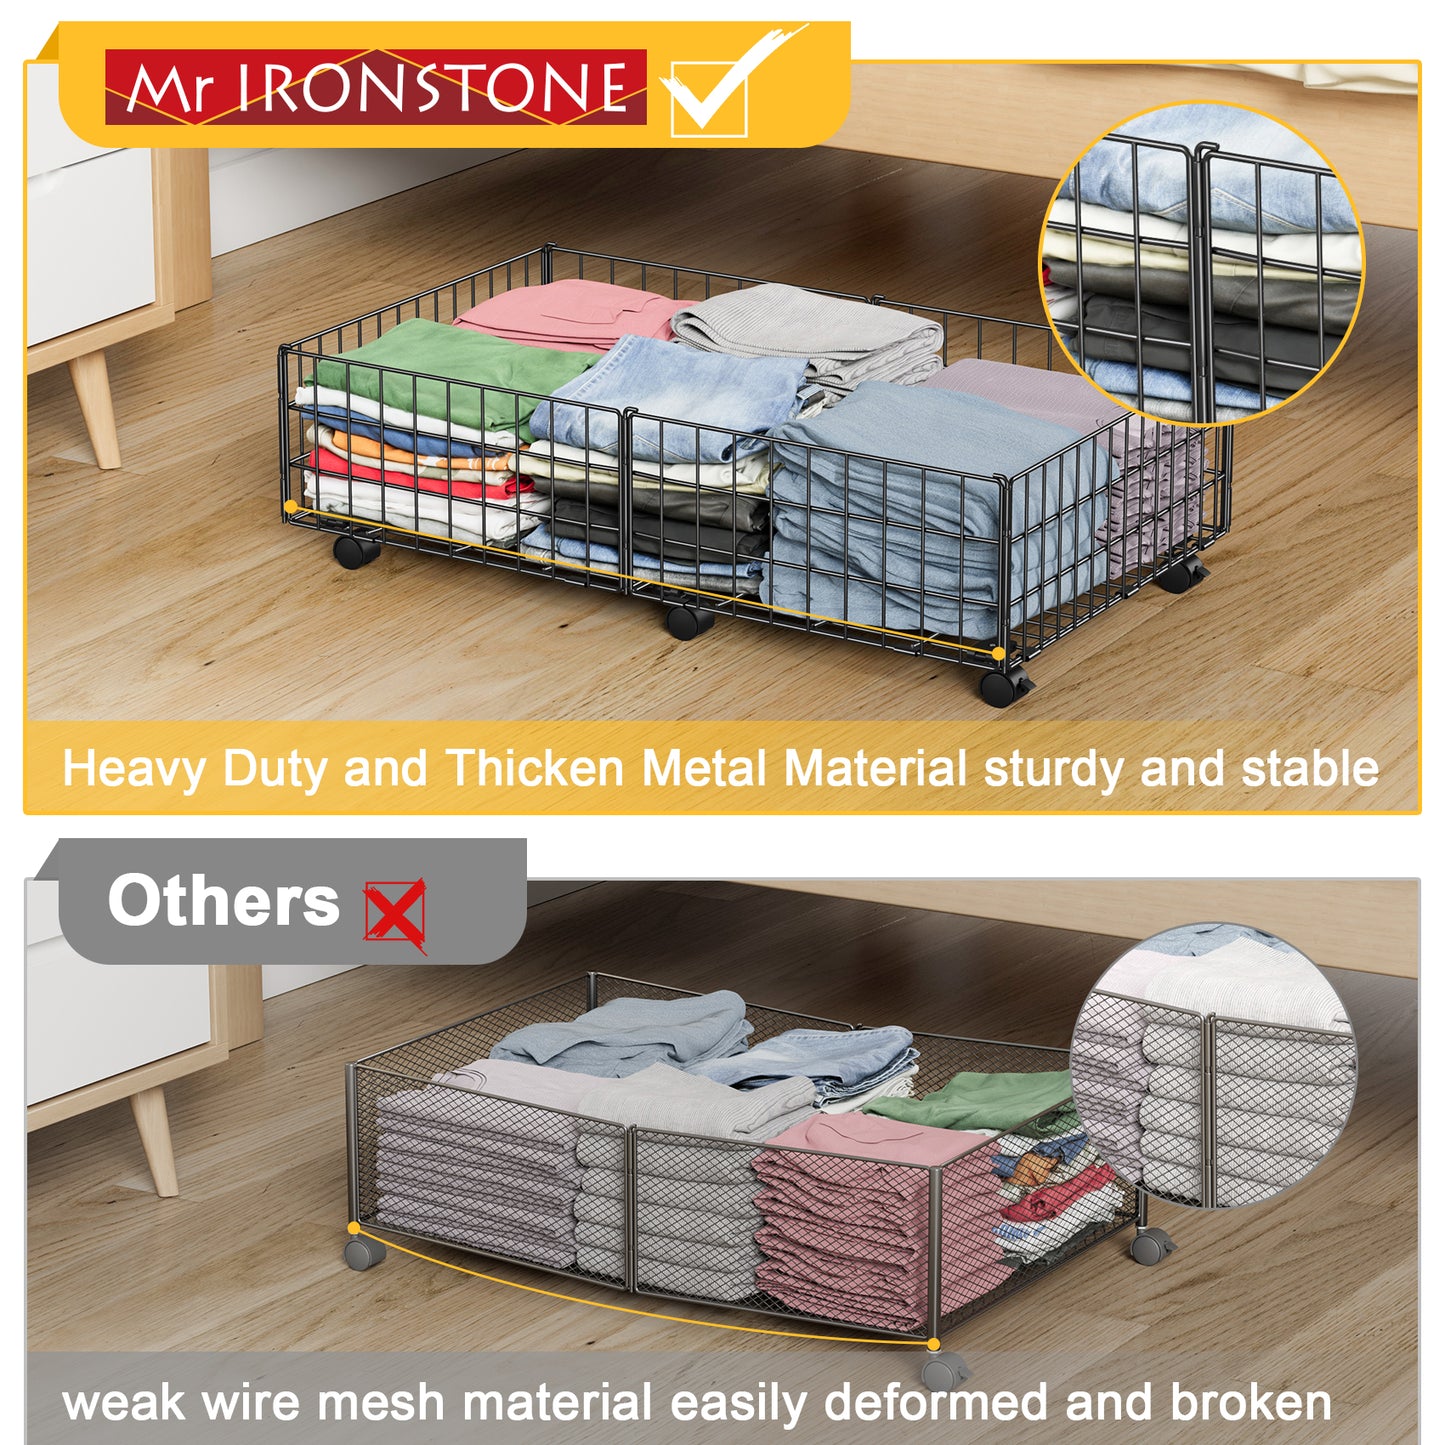 Mr IRONSTONE Under Bed Storage Containers with Wheels - Black 2Pcs Metal Organizer Drawer for Under the Bed Storage